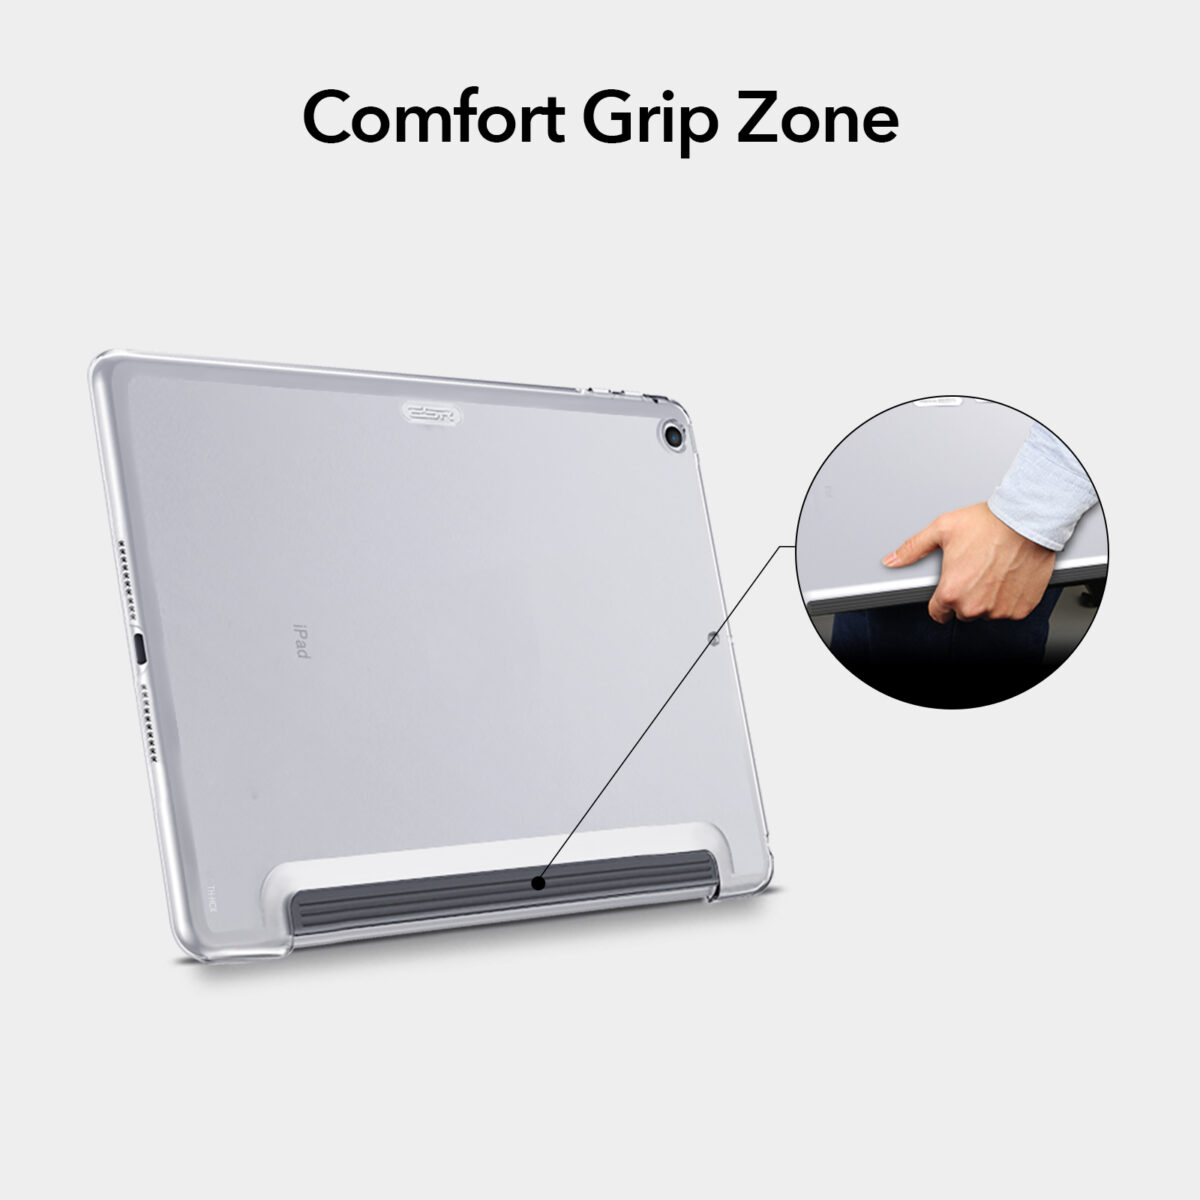 Crystal Clear hard back case with comfort grip zone for iPad Pro